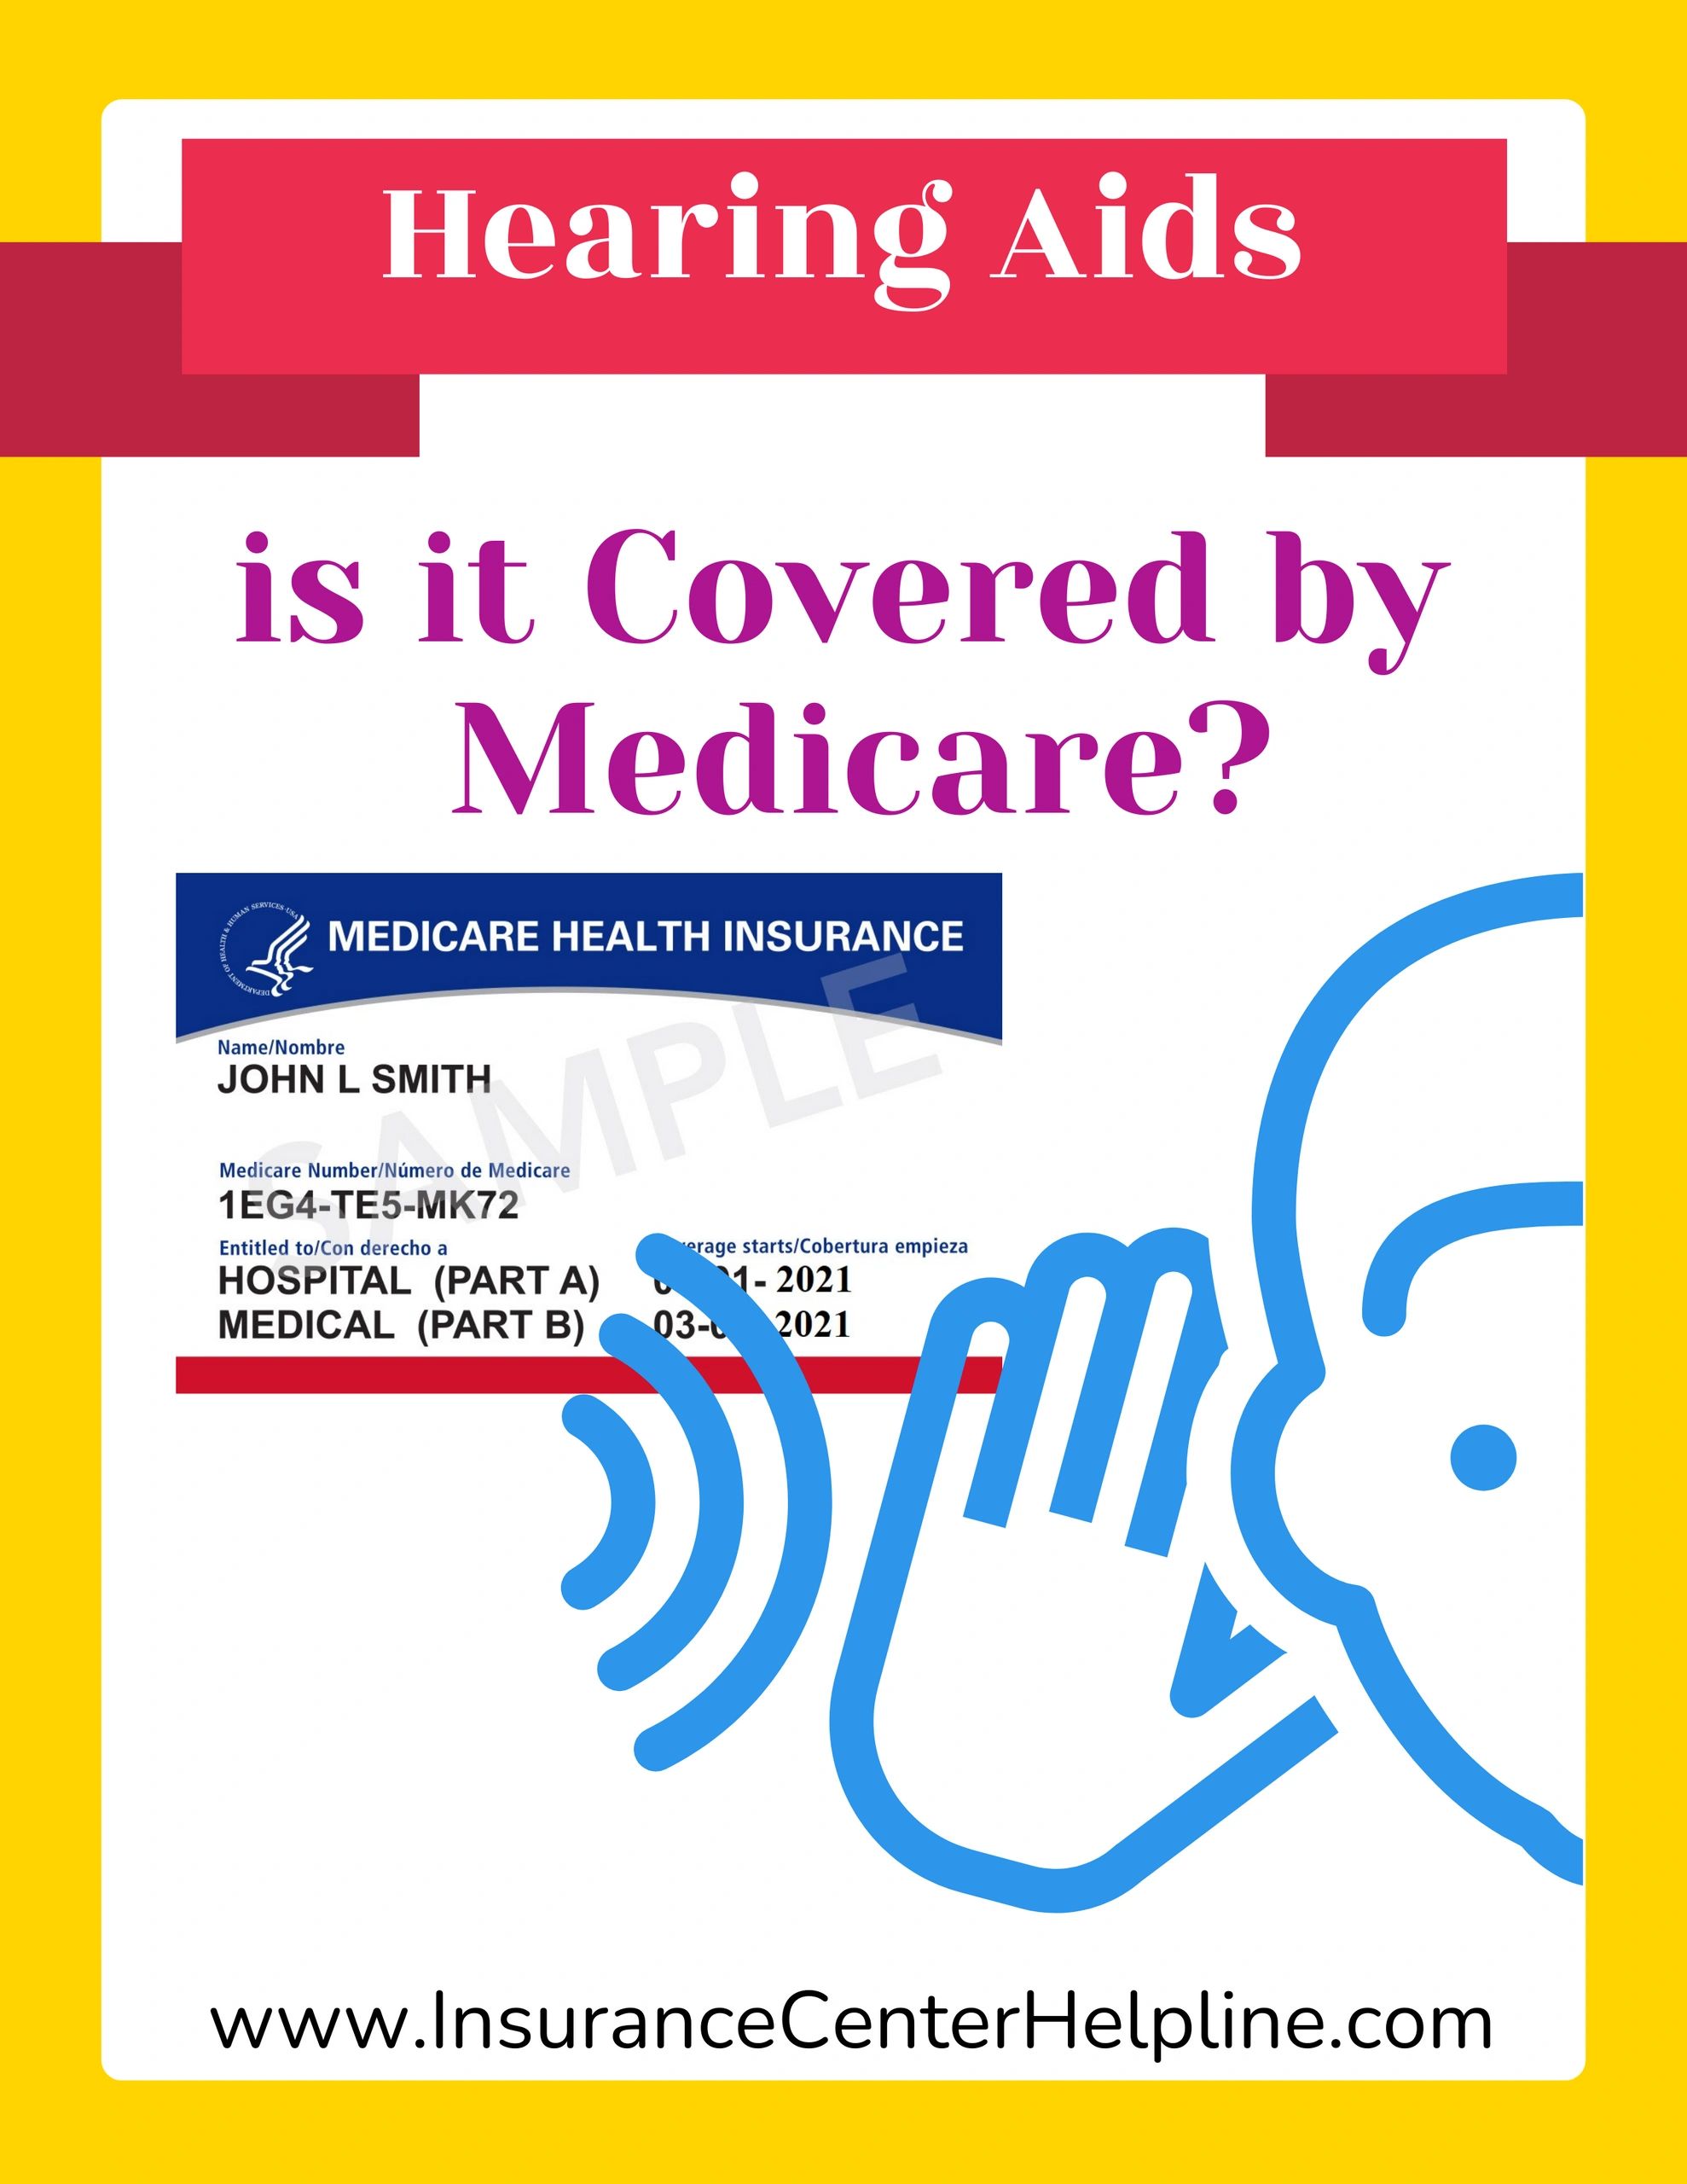 Are hearing aids covered by Medicare?